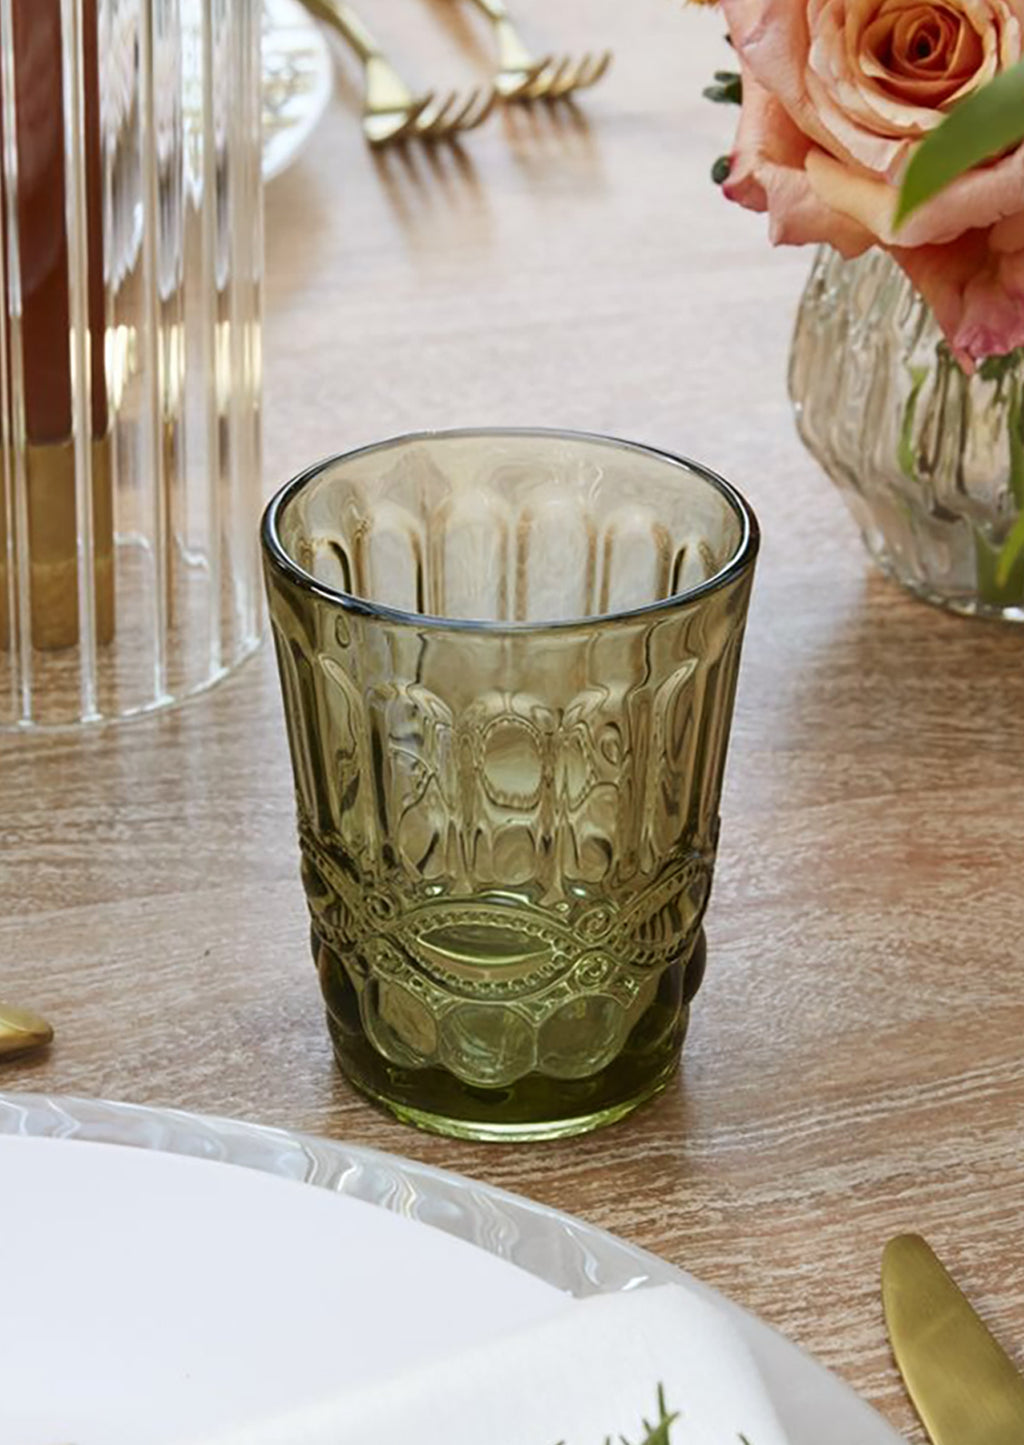 1: An olive green glass cup with vintage style embossed design.